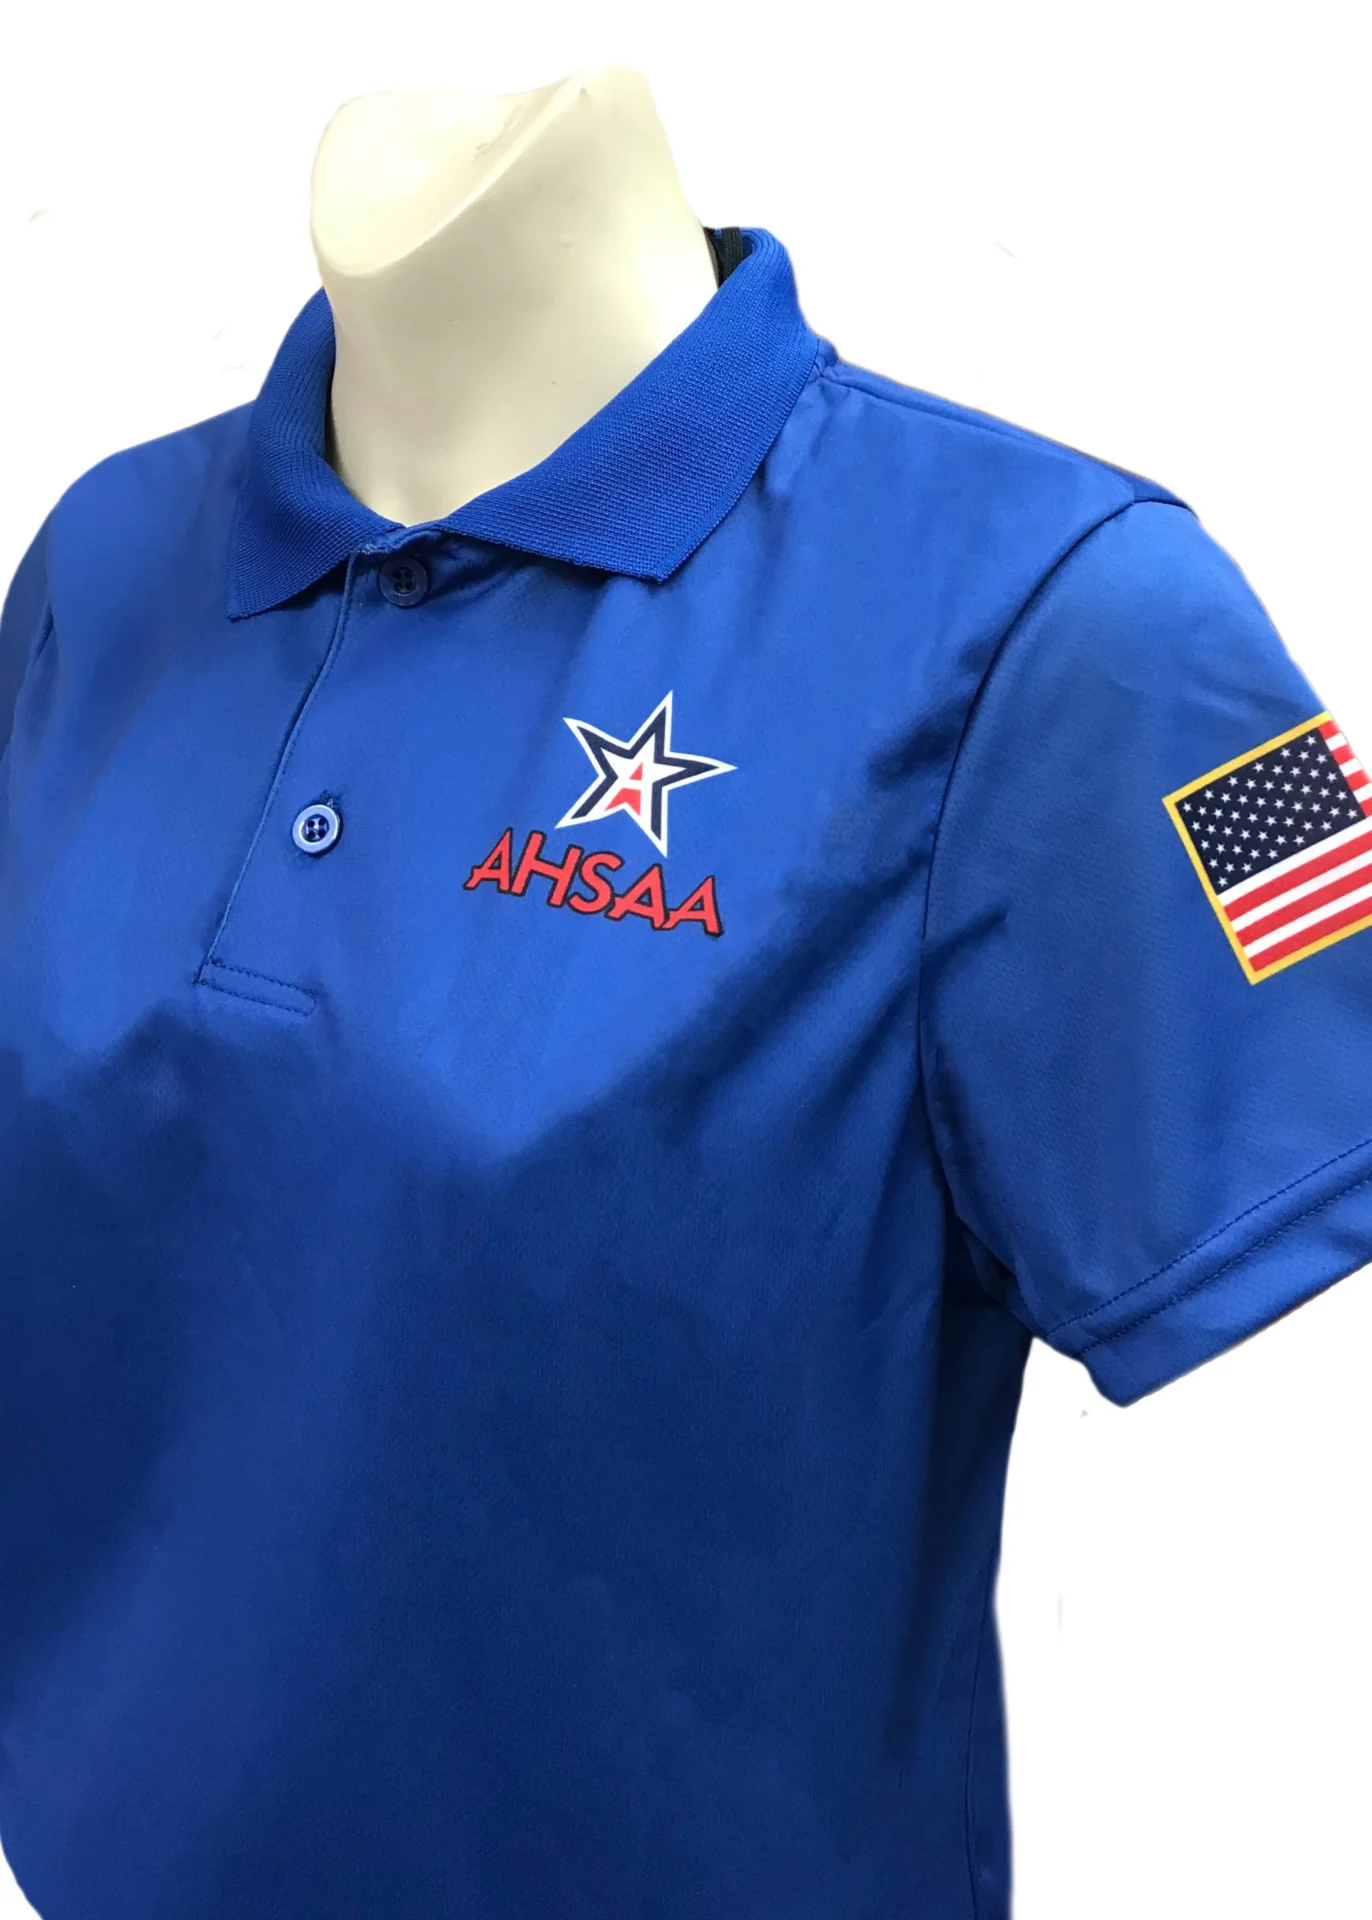 A close up of the sleeve and collar on an american flag polo shirt.